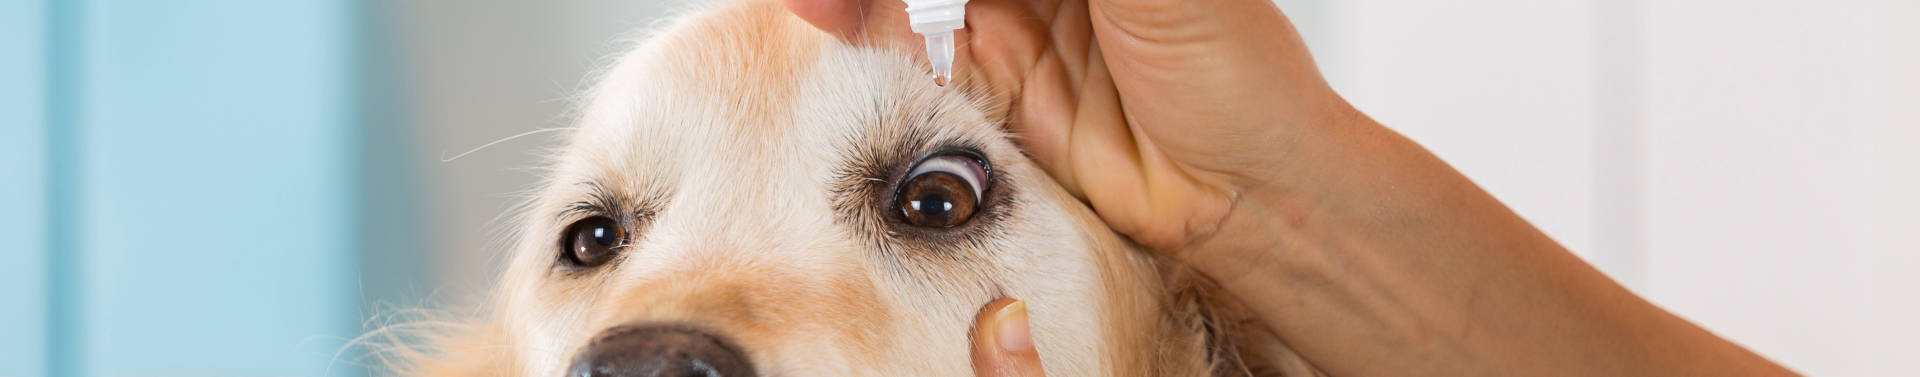 eye drops for dogs with cataracts